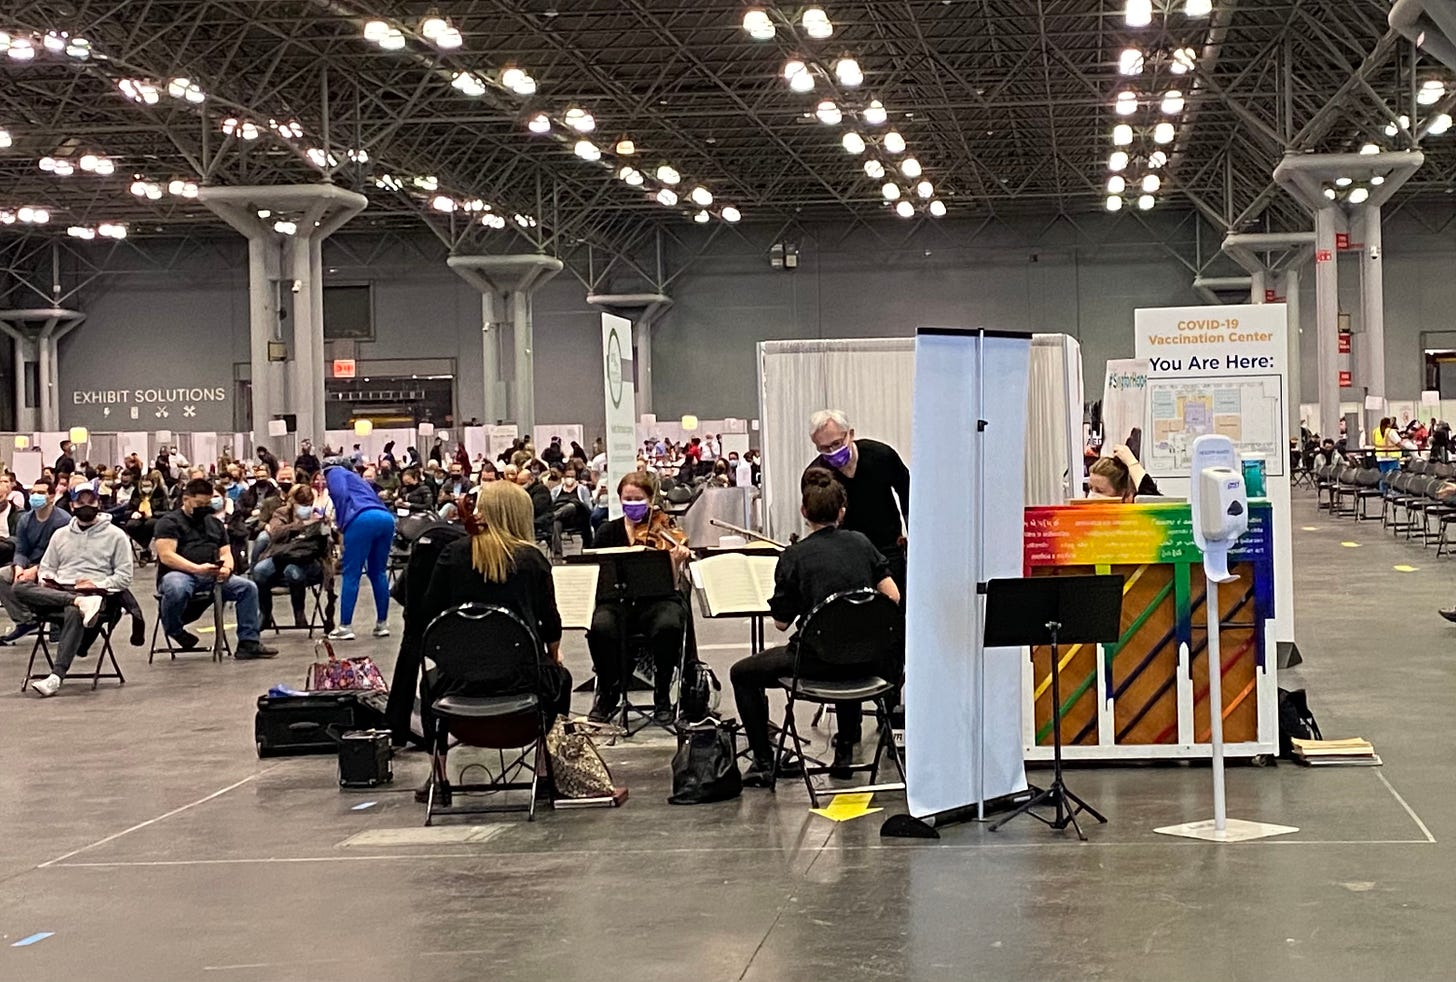 Jazz band at Javits at the medical recovery area post-vaccine